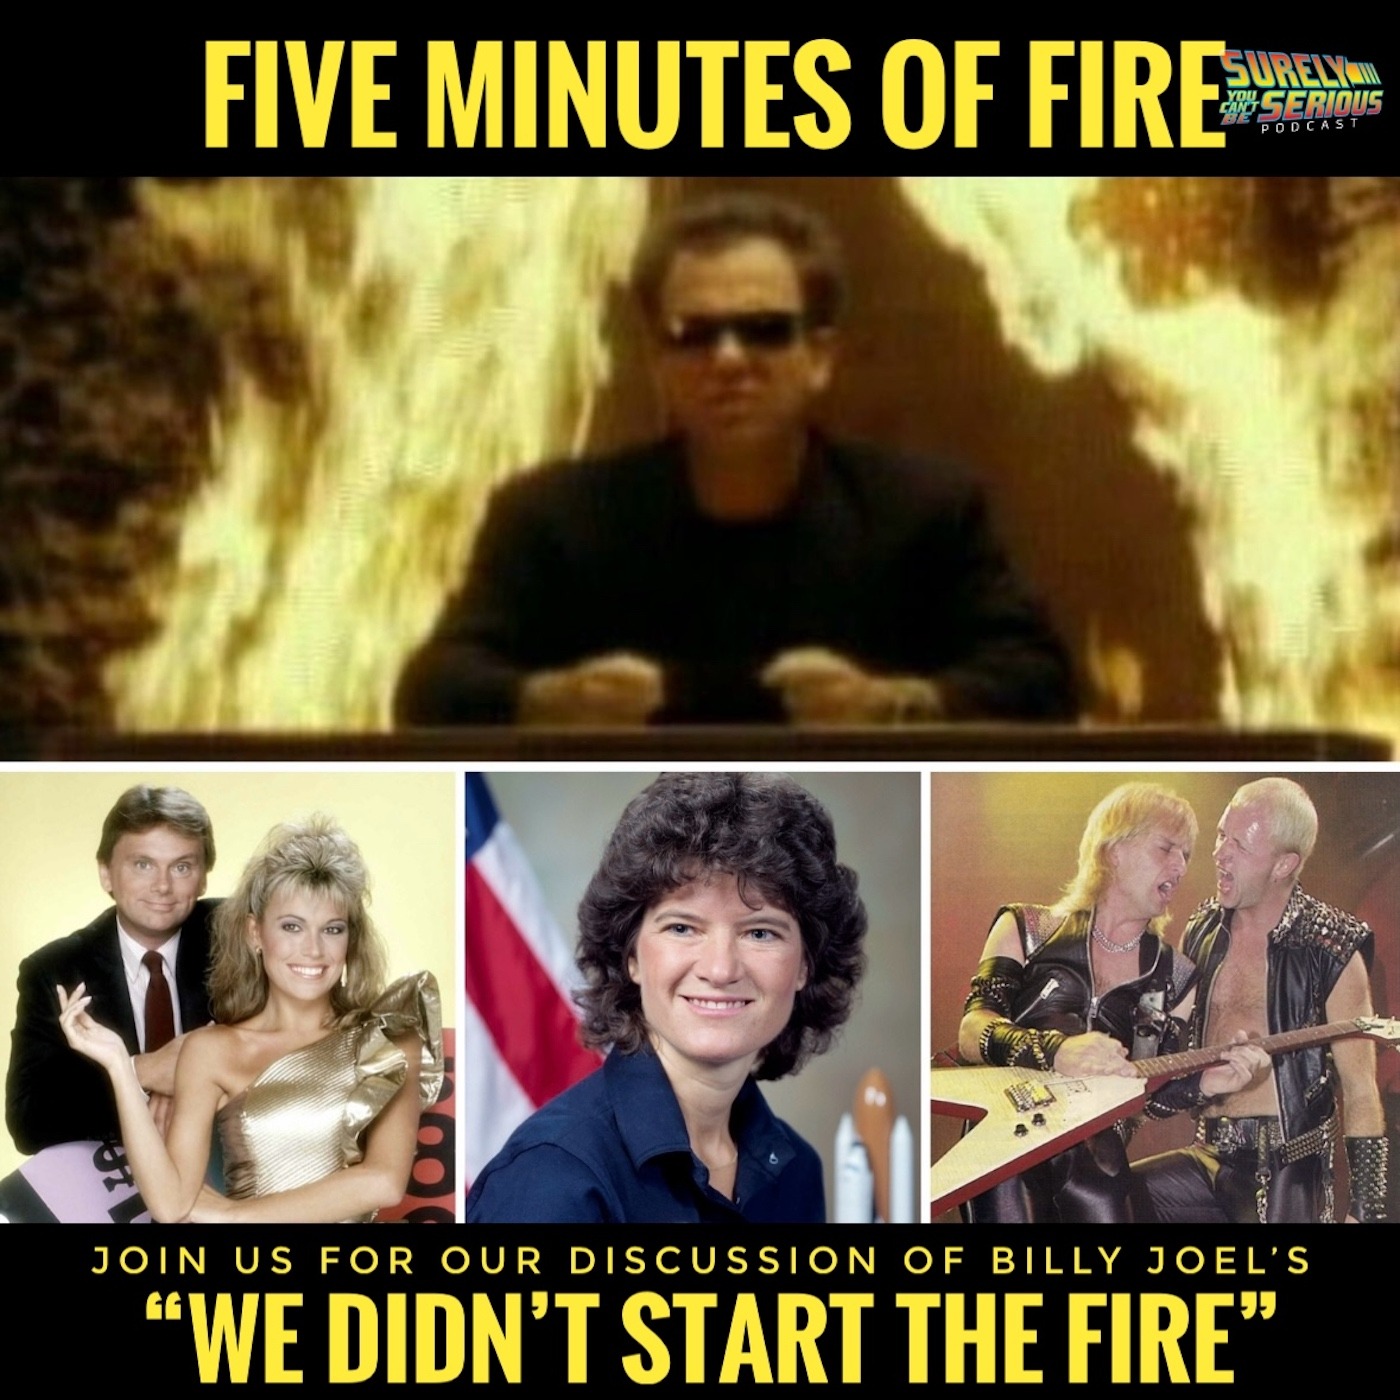 ”Five Minutes of Fire”: Wheel of Fortune, Sally Ride, Heavy Metal Suicide